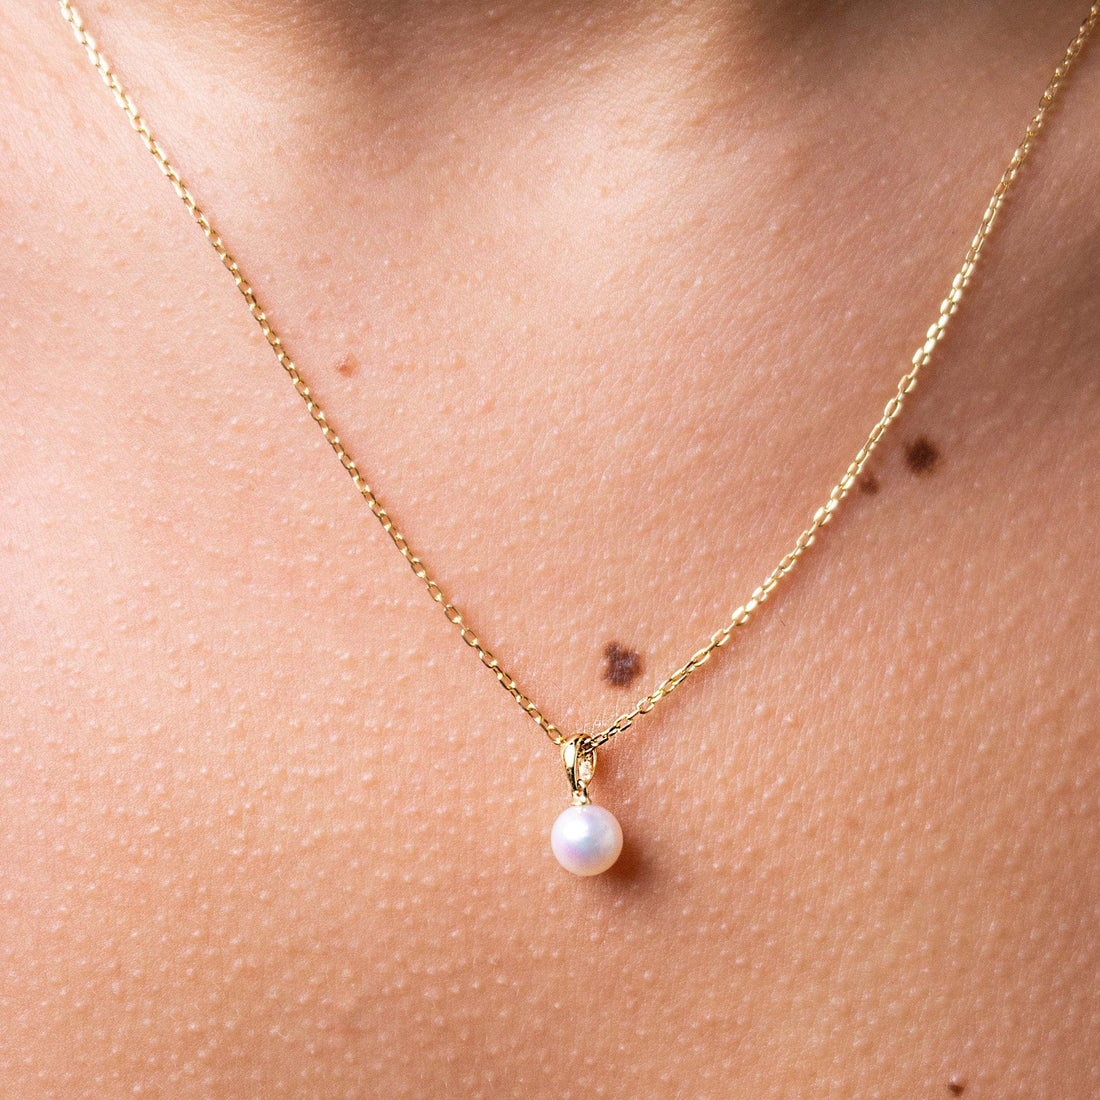 Mikimoto Pearl Pendant Solitaire Necklace in 18k Yellow Gold